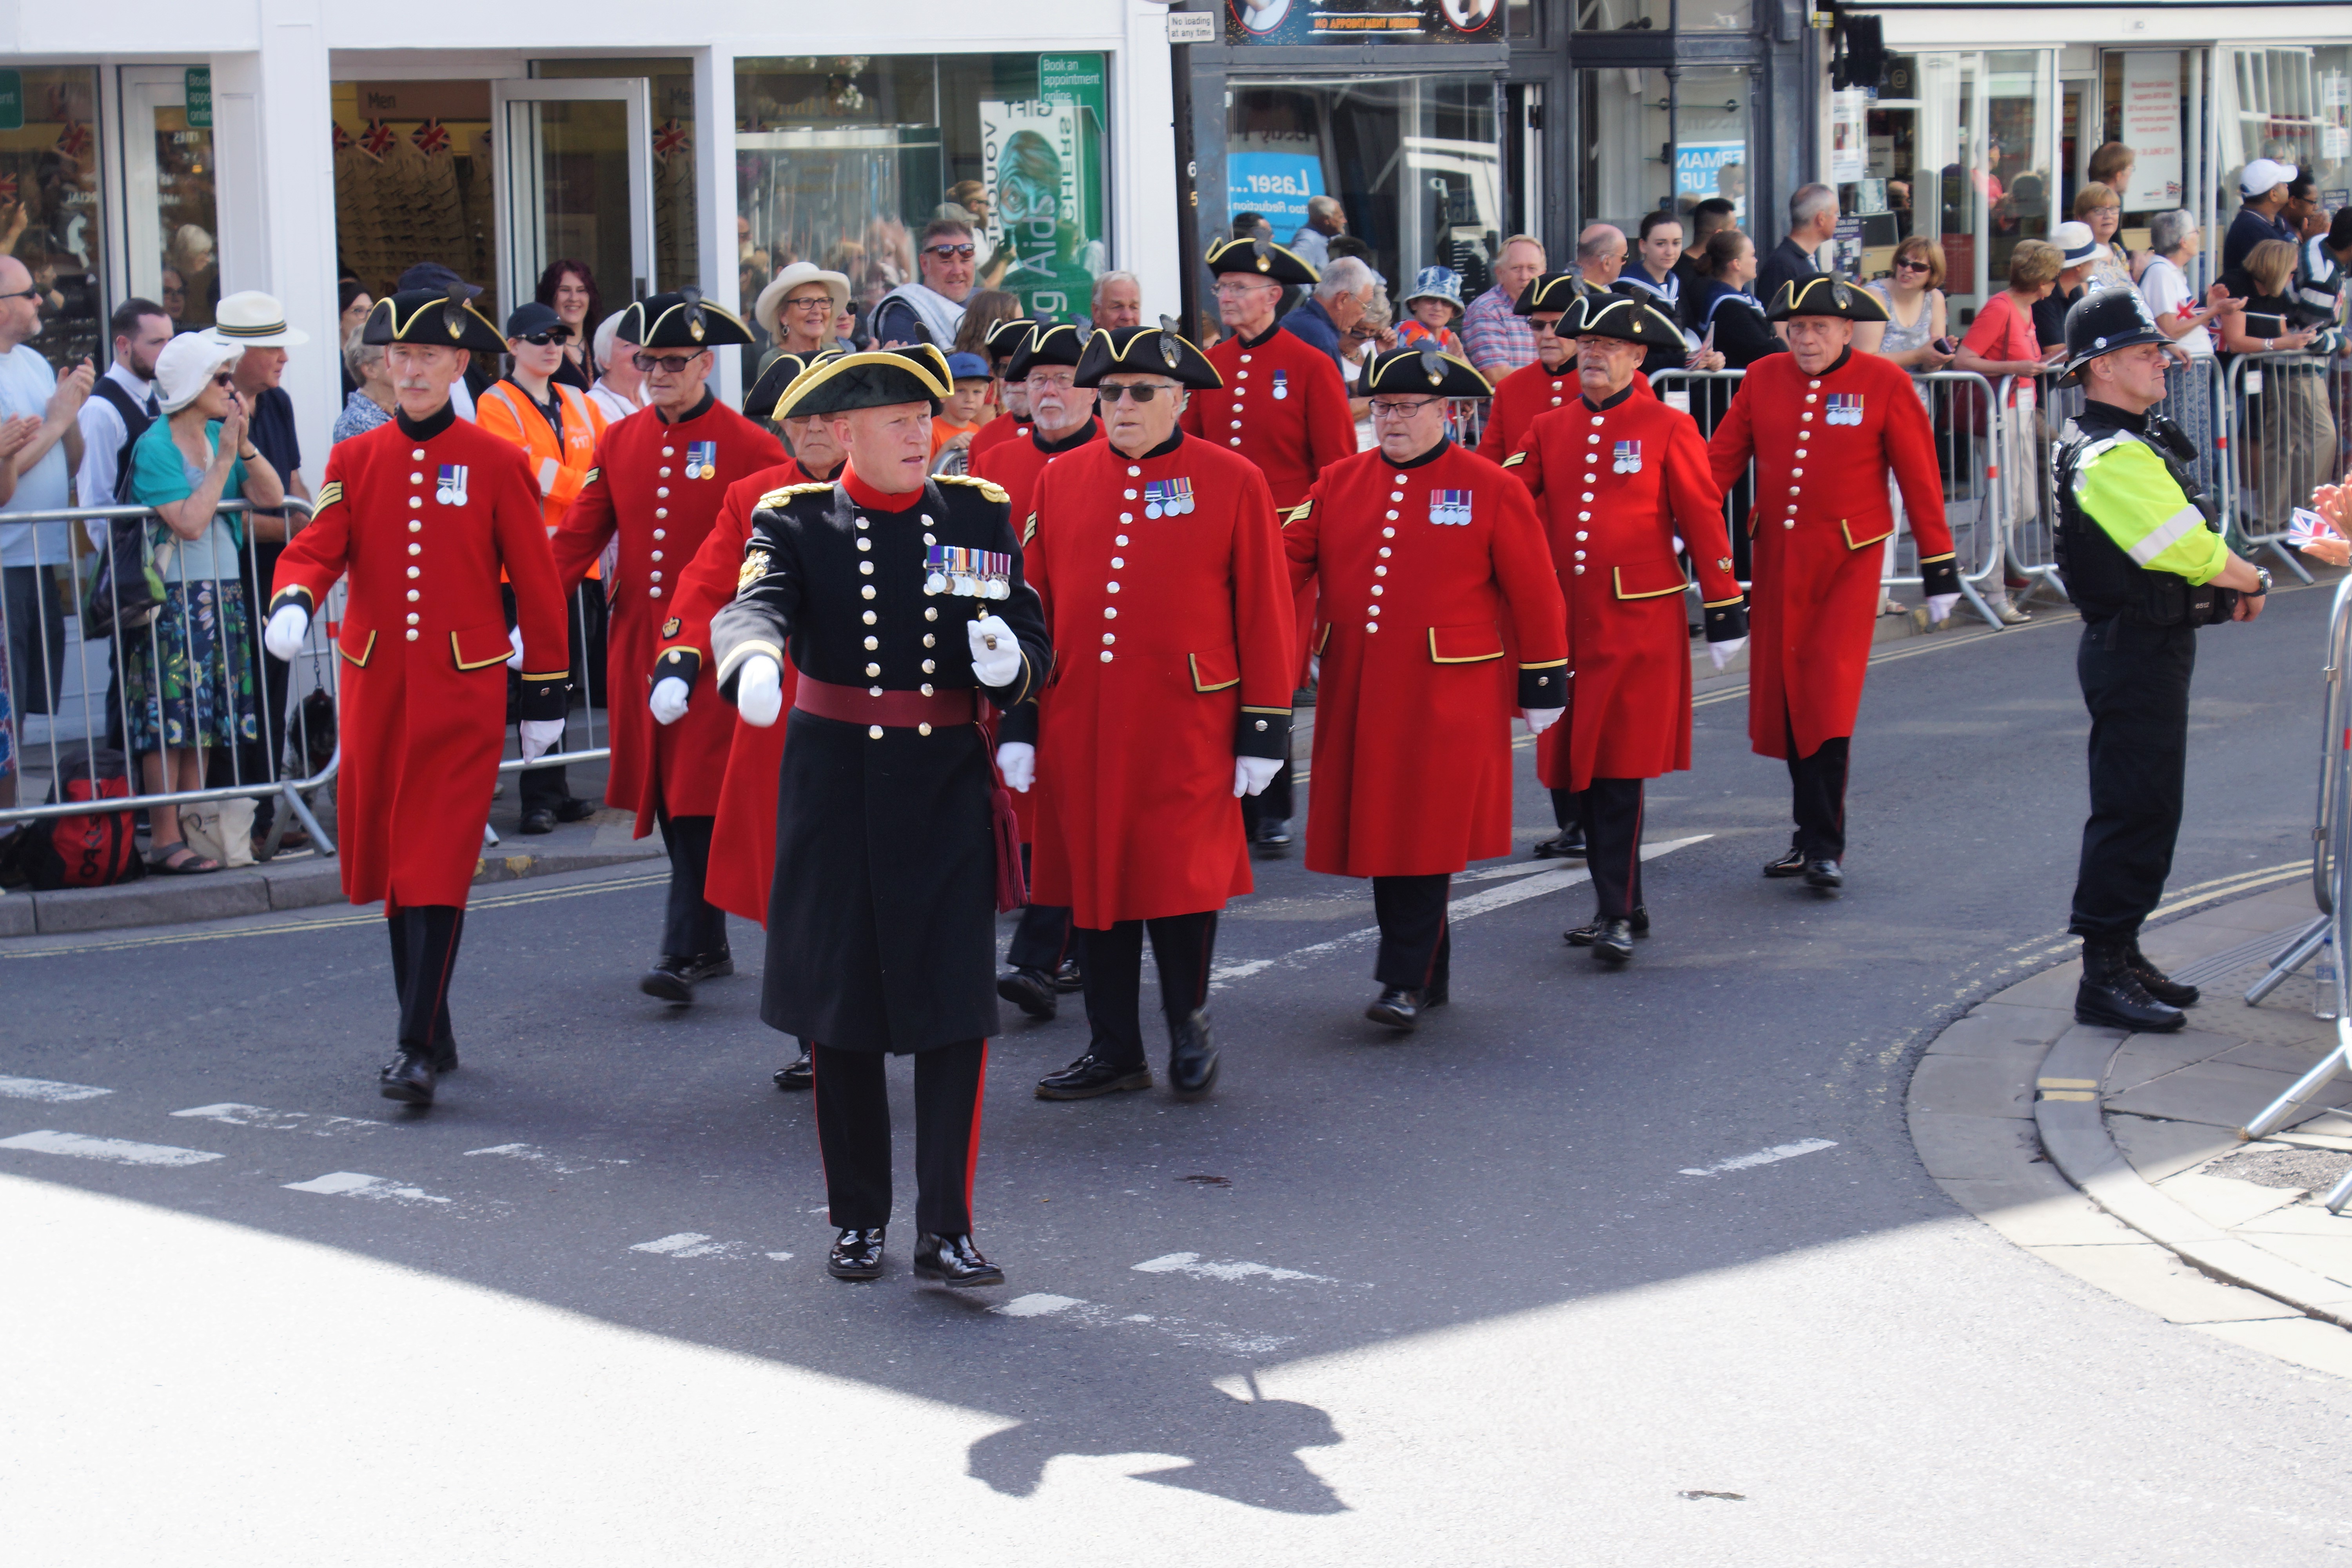 Armed Forces Day parade, June 2019